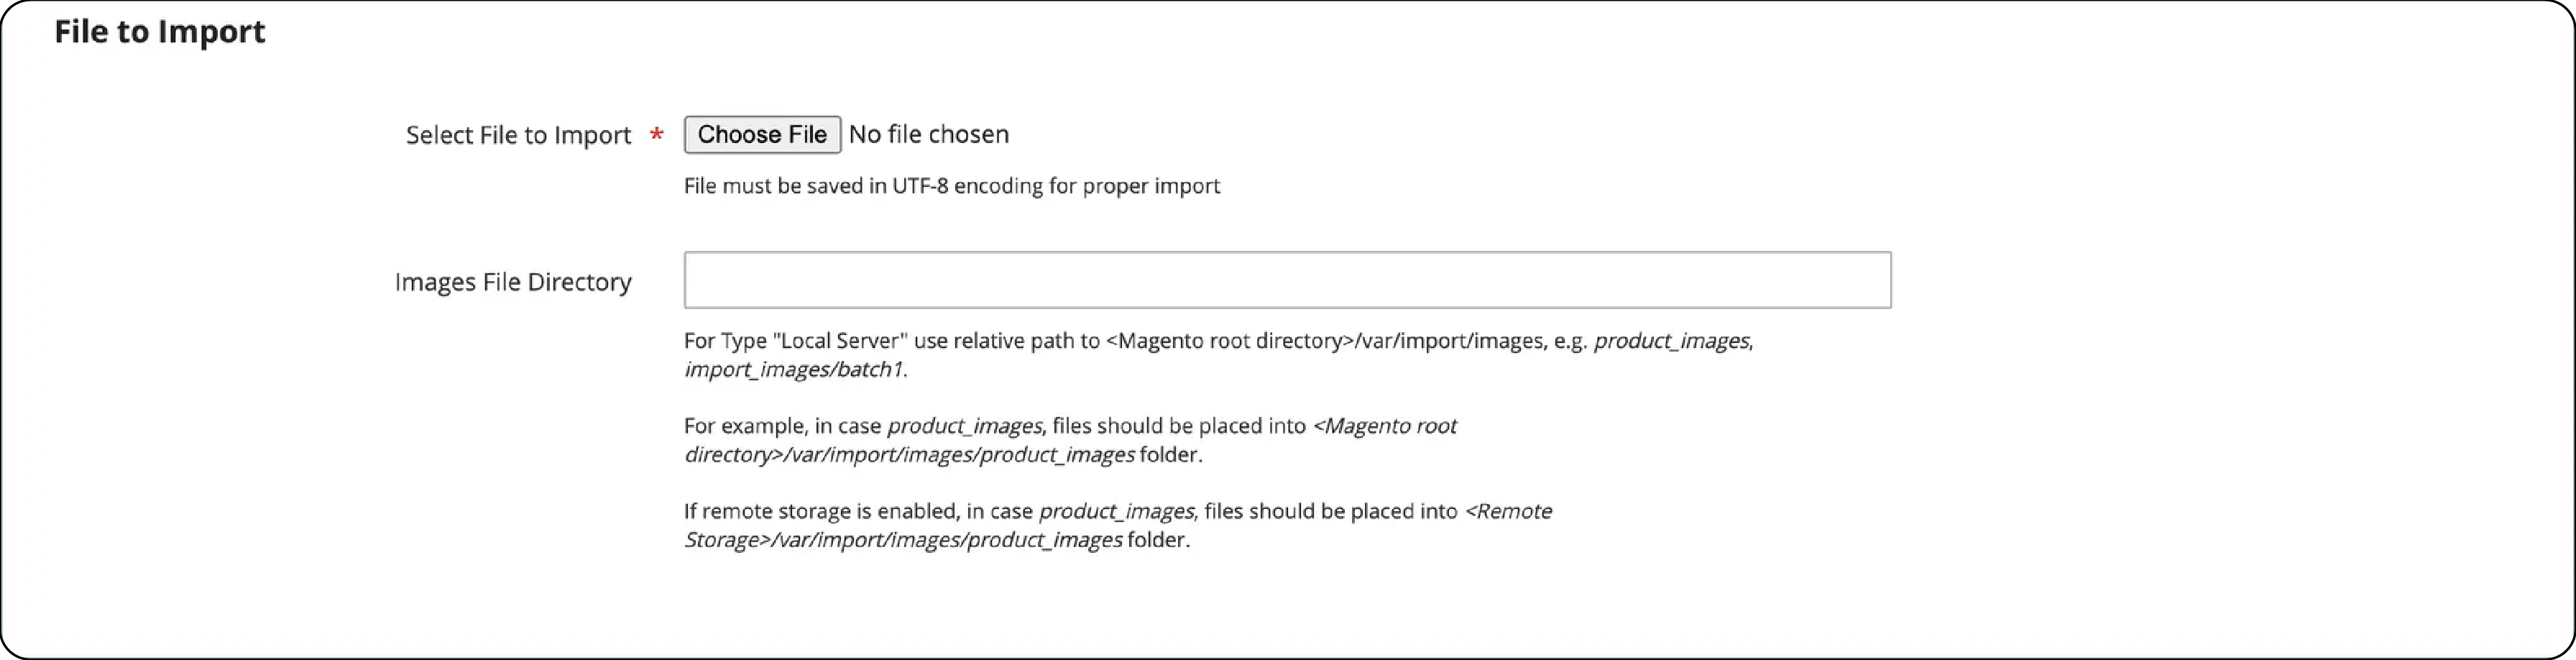 Method 1-Import images from the local server-Images File Directory